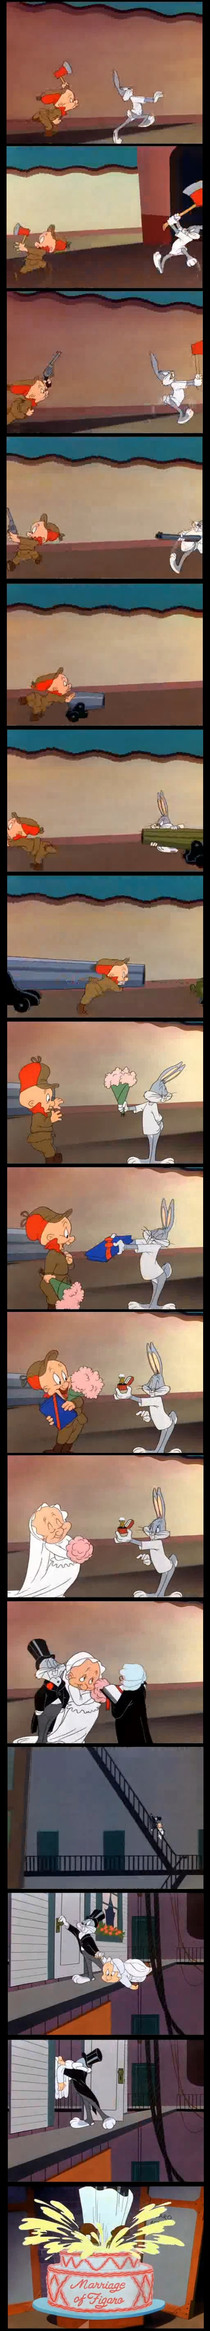 Nobody can escalate quicker than classic Looney Tunes